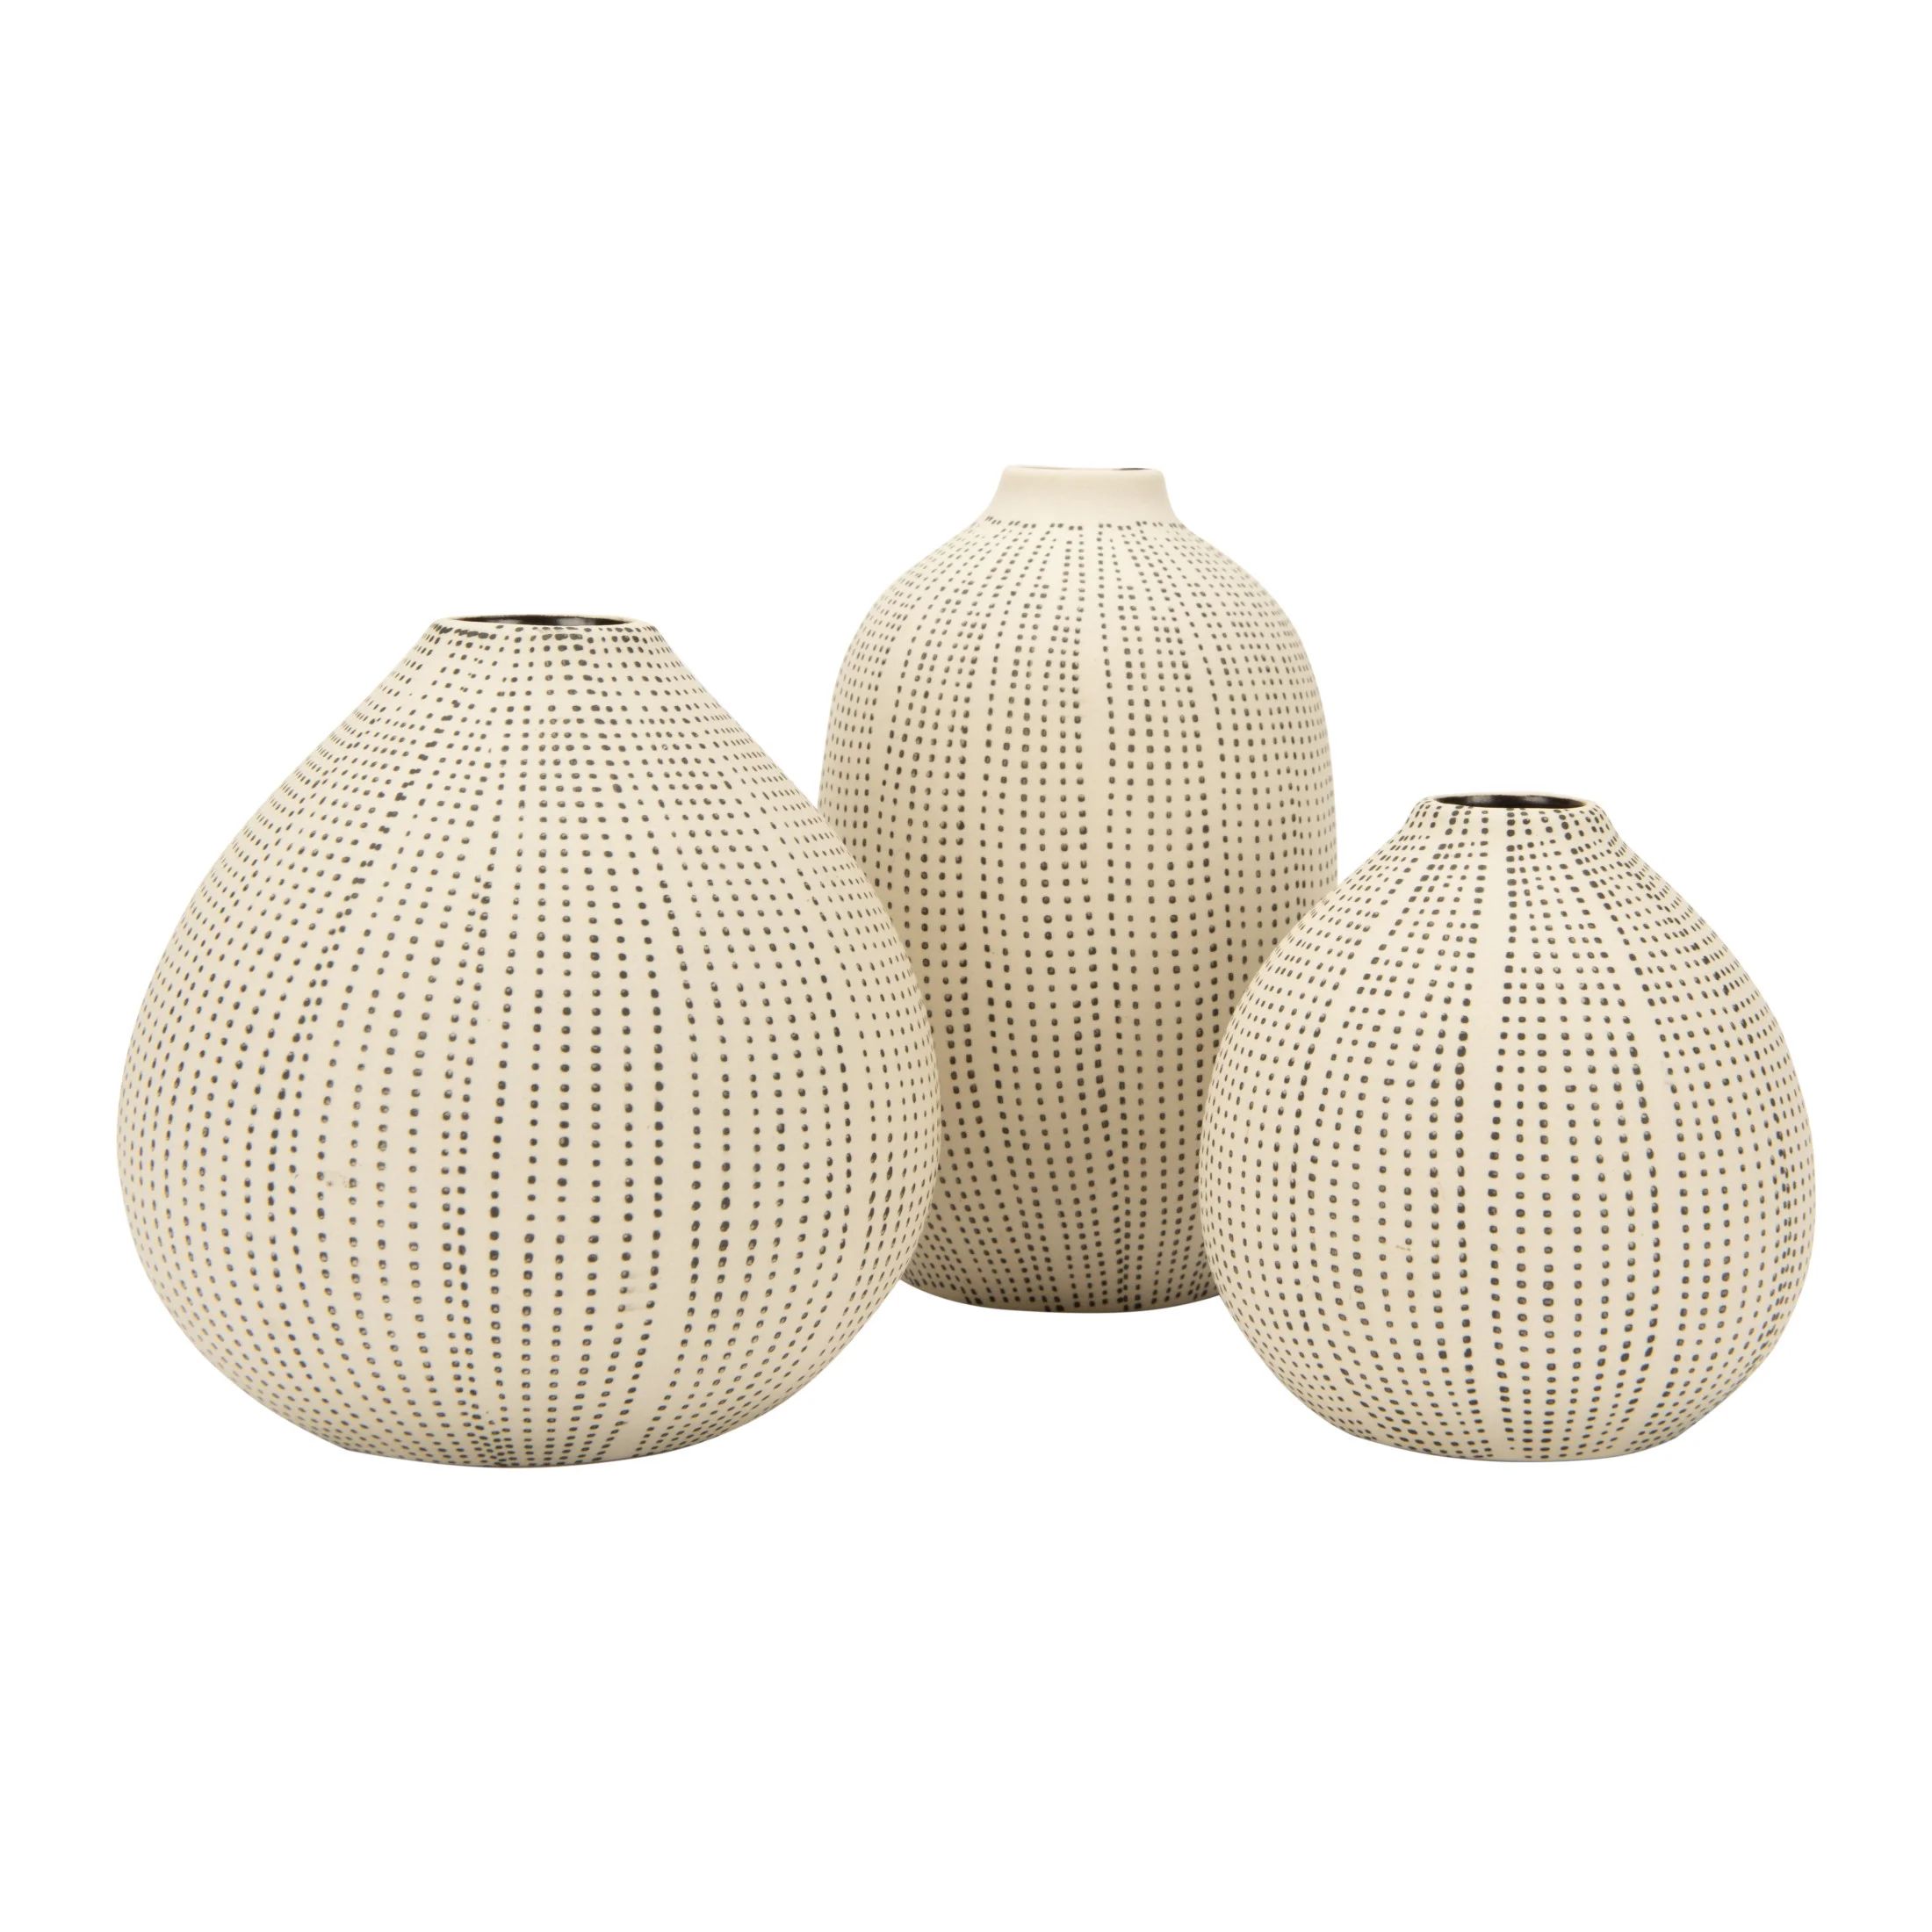 Creative Co-Op Creative Co-Op Round Stoneware Vases with Polka Dot Finish, White and Black, Set o... | Walmart (US)